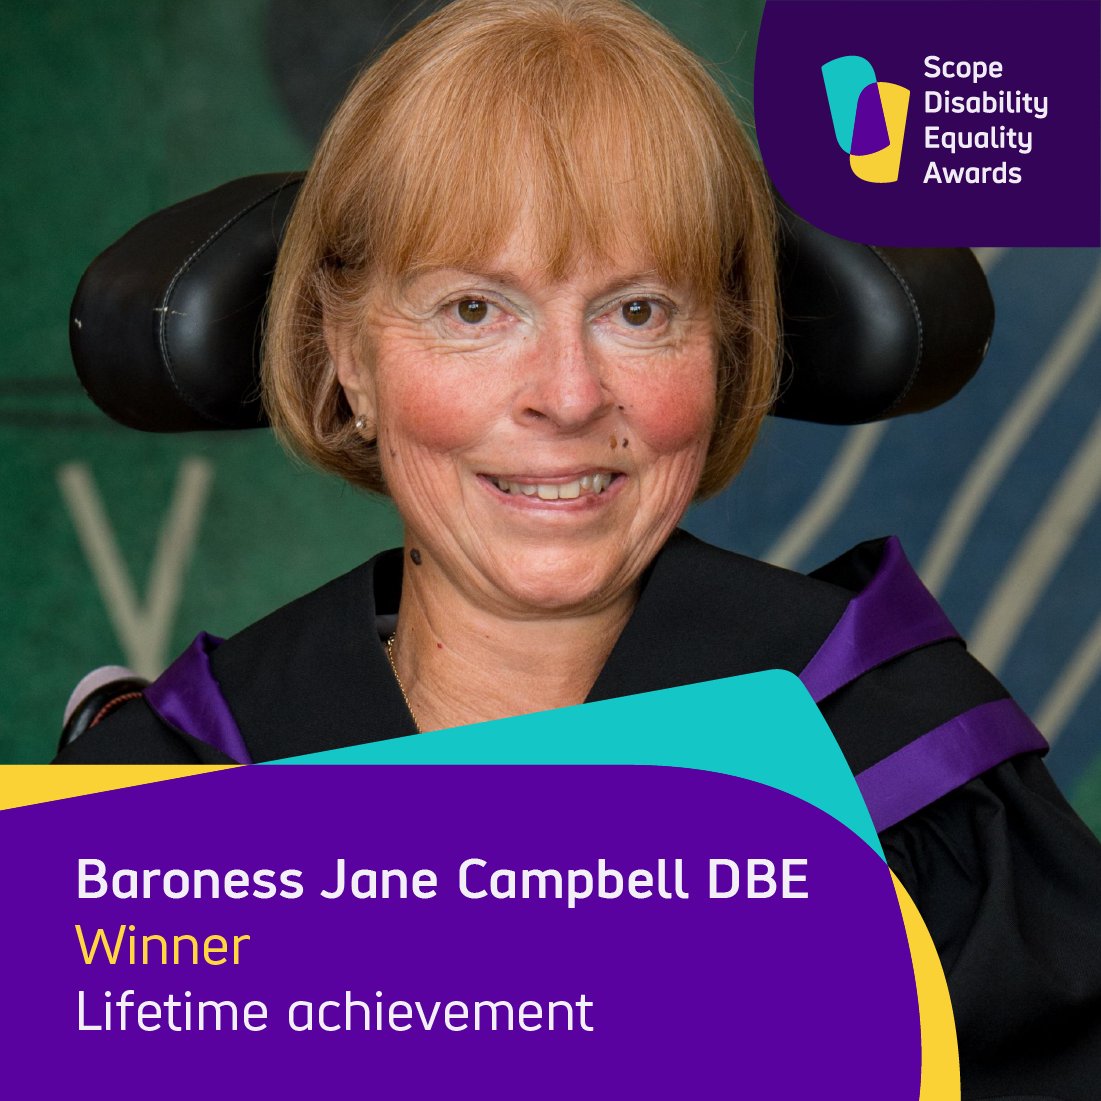 🏆 Baroness Jane Campbell DBE wins our Scope Lifetime Achievement Award! A crossbench peer, Jane campaigns for disability rights by engaging with parliament, and empowers disabled people through social and political change. We’re pleased to recognise @BnsJaneCampbell’s work.